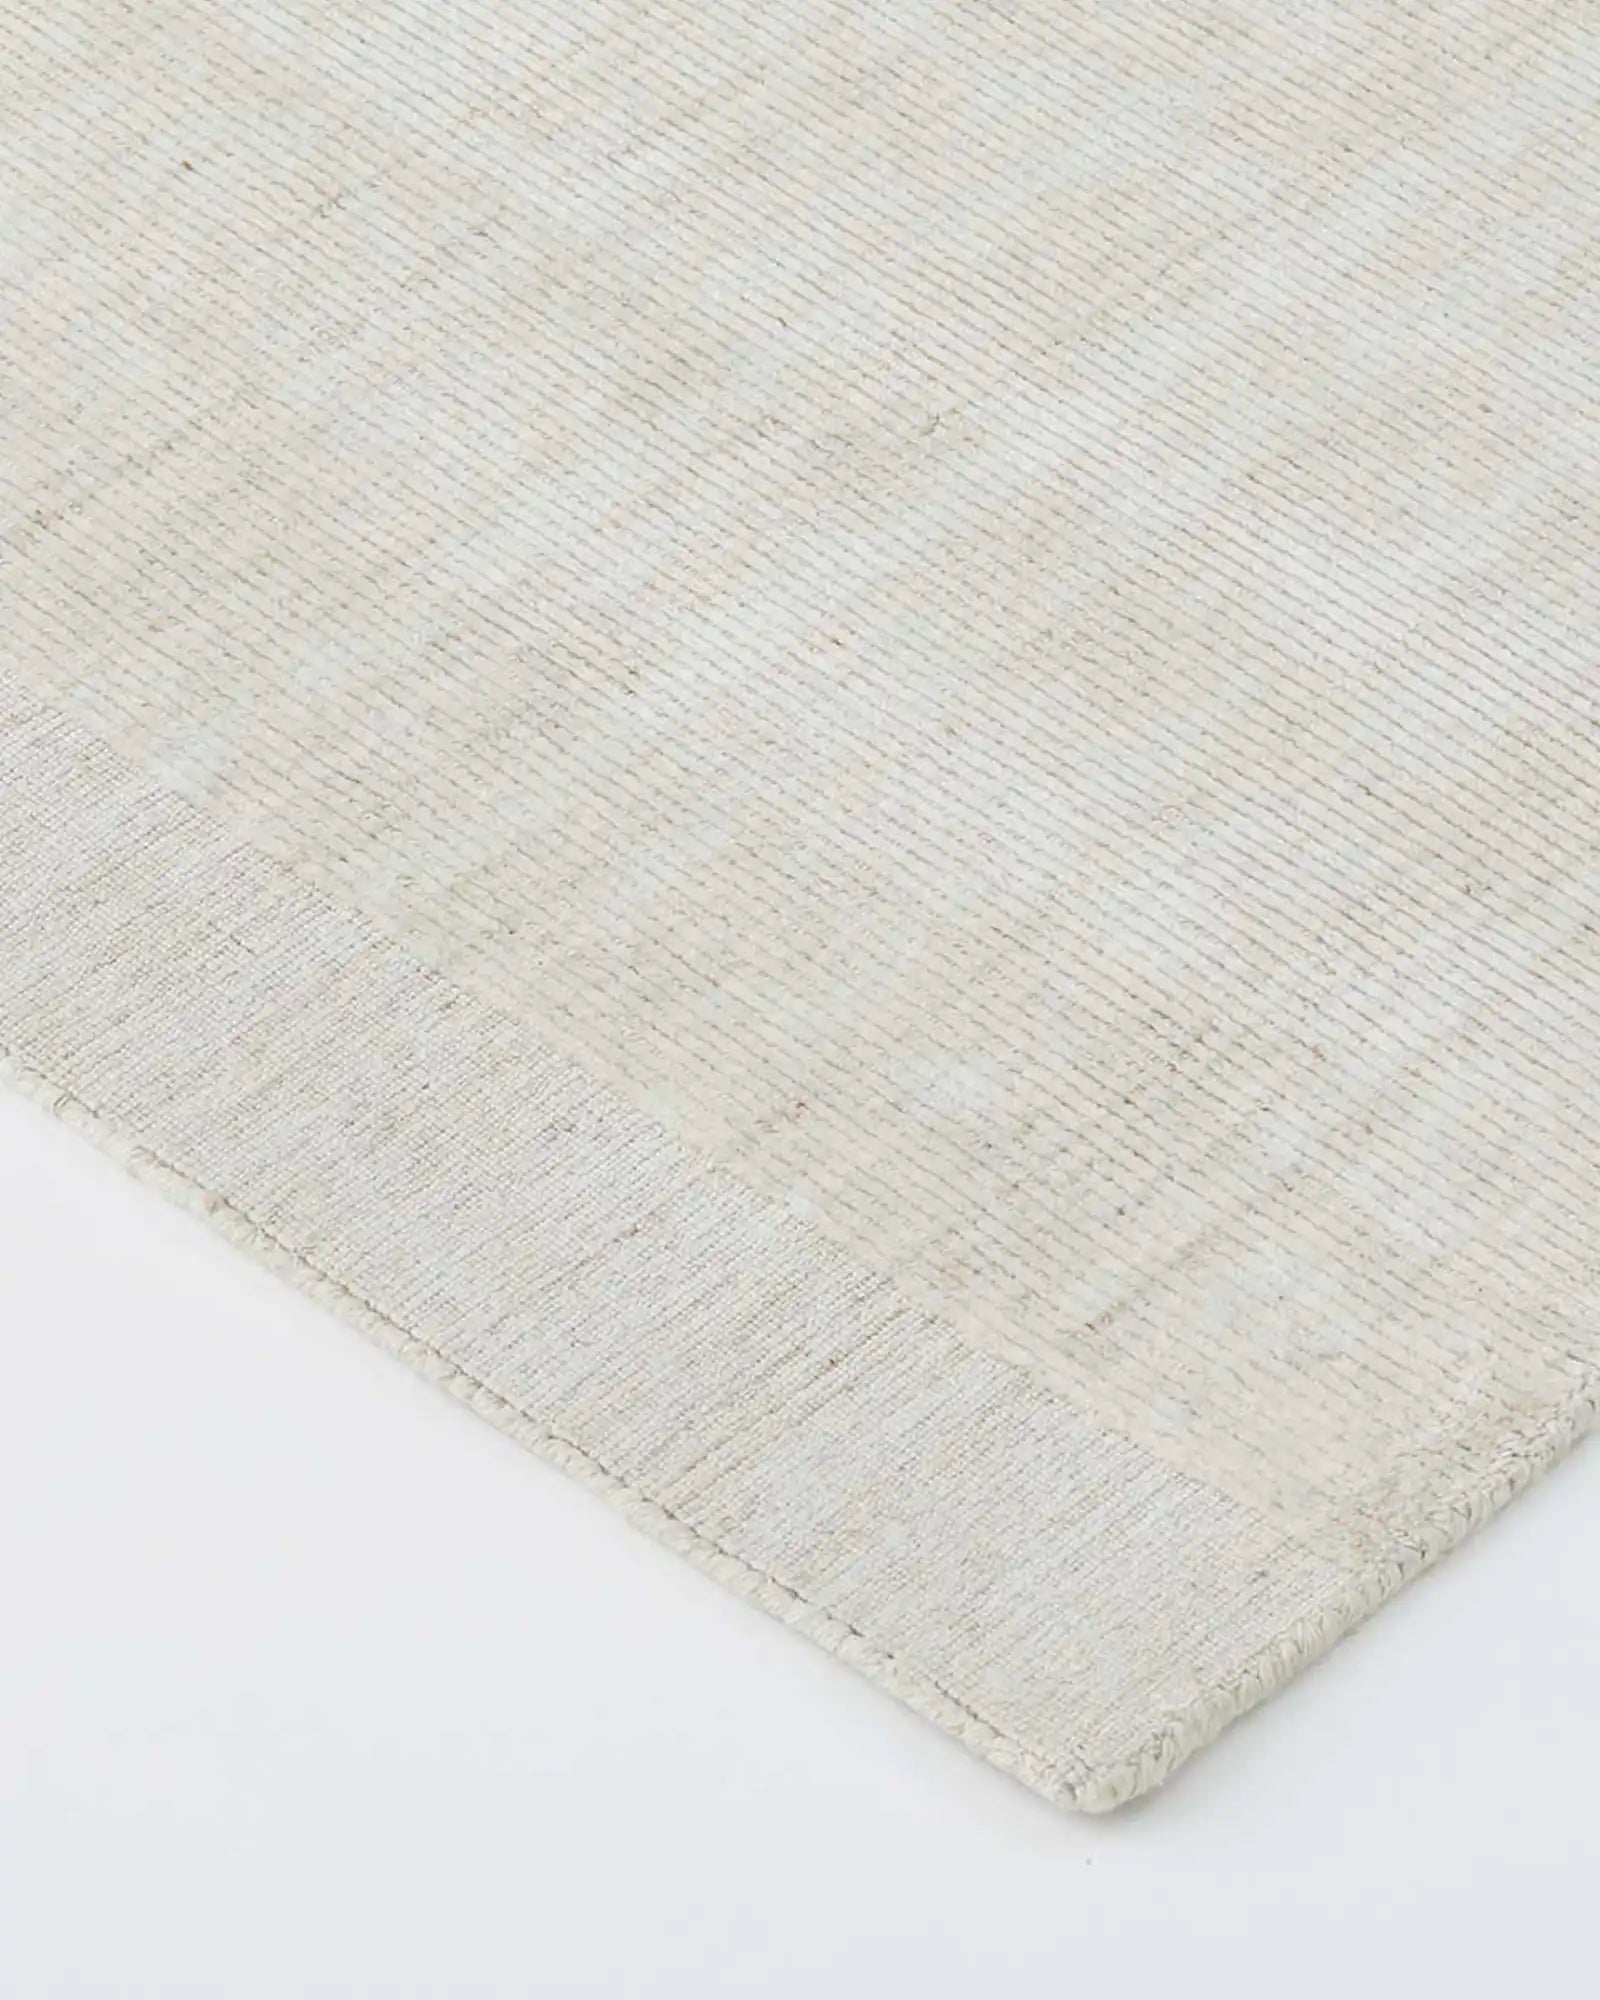 Close-up of the rug's ribbed texture, showcasing the quality of the viscose and wool blend.